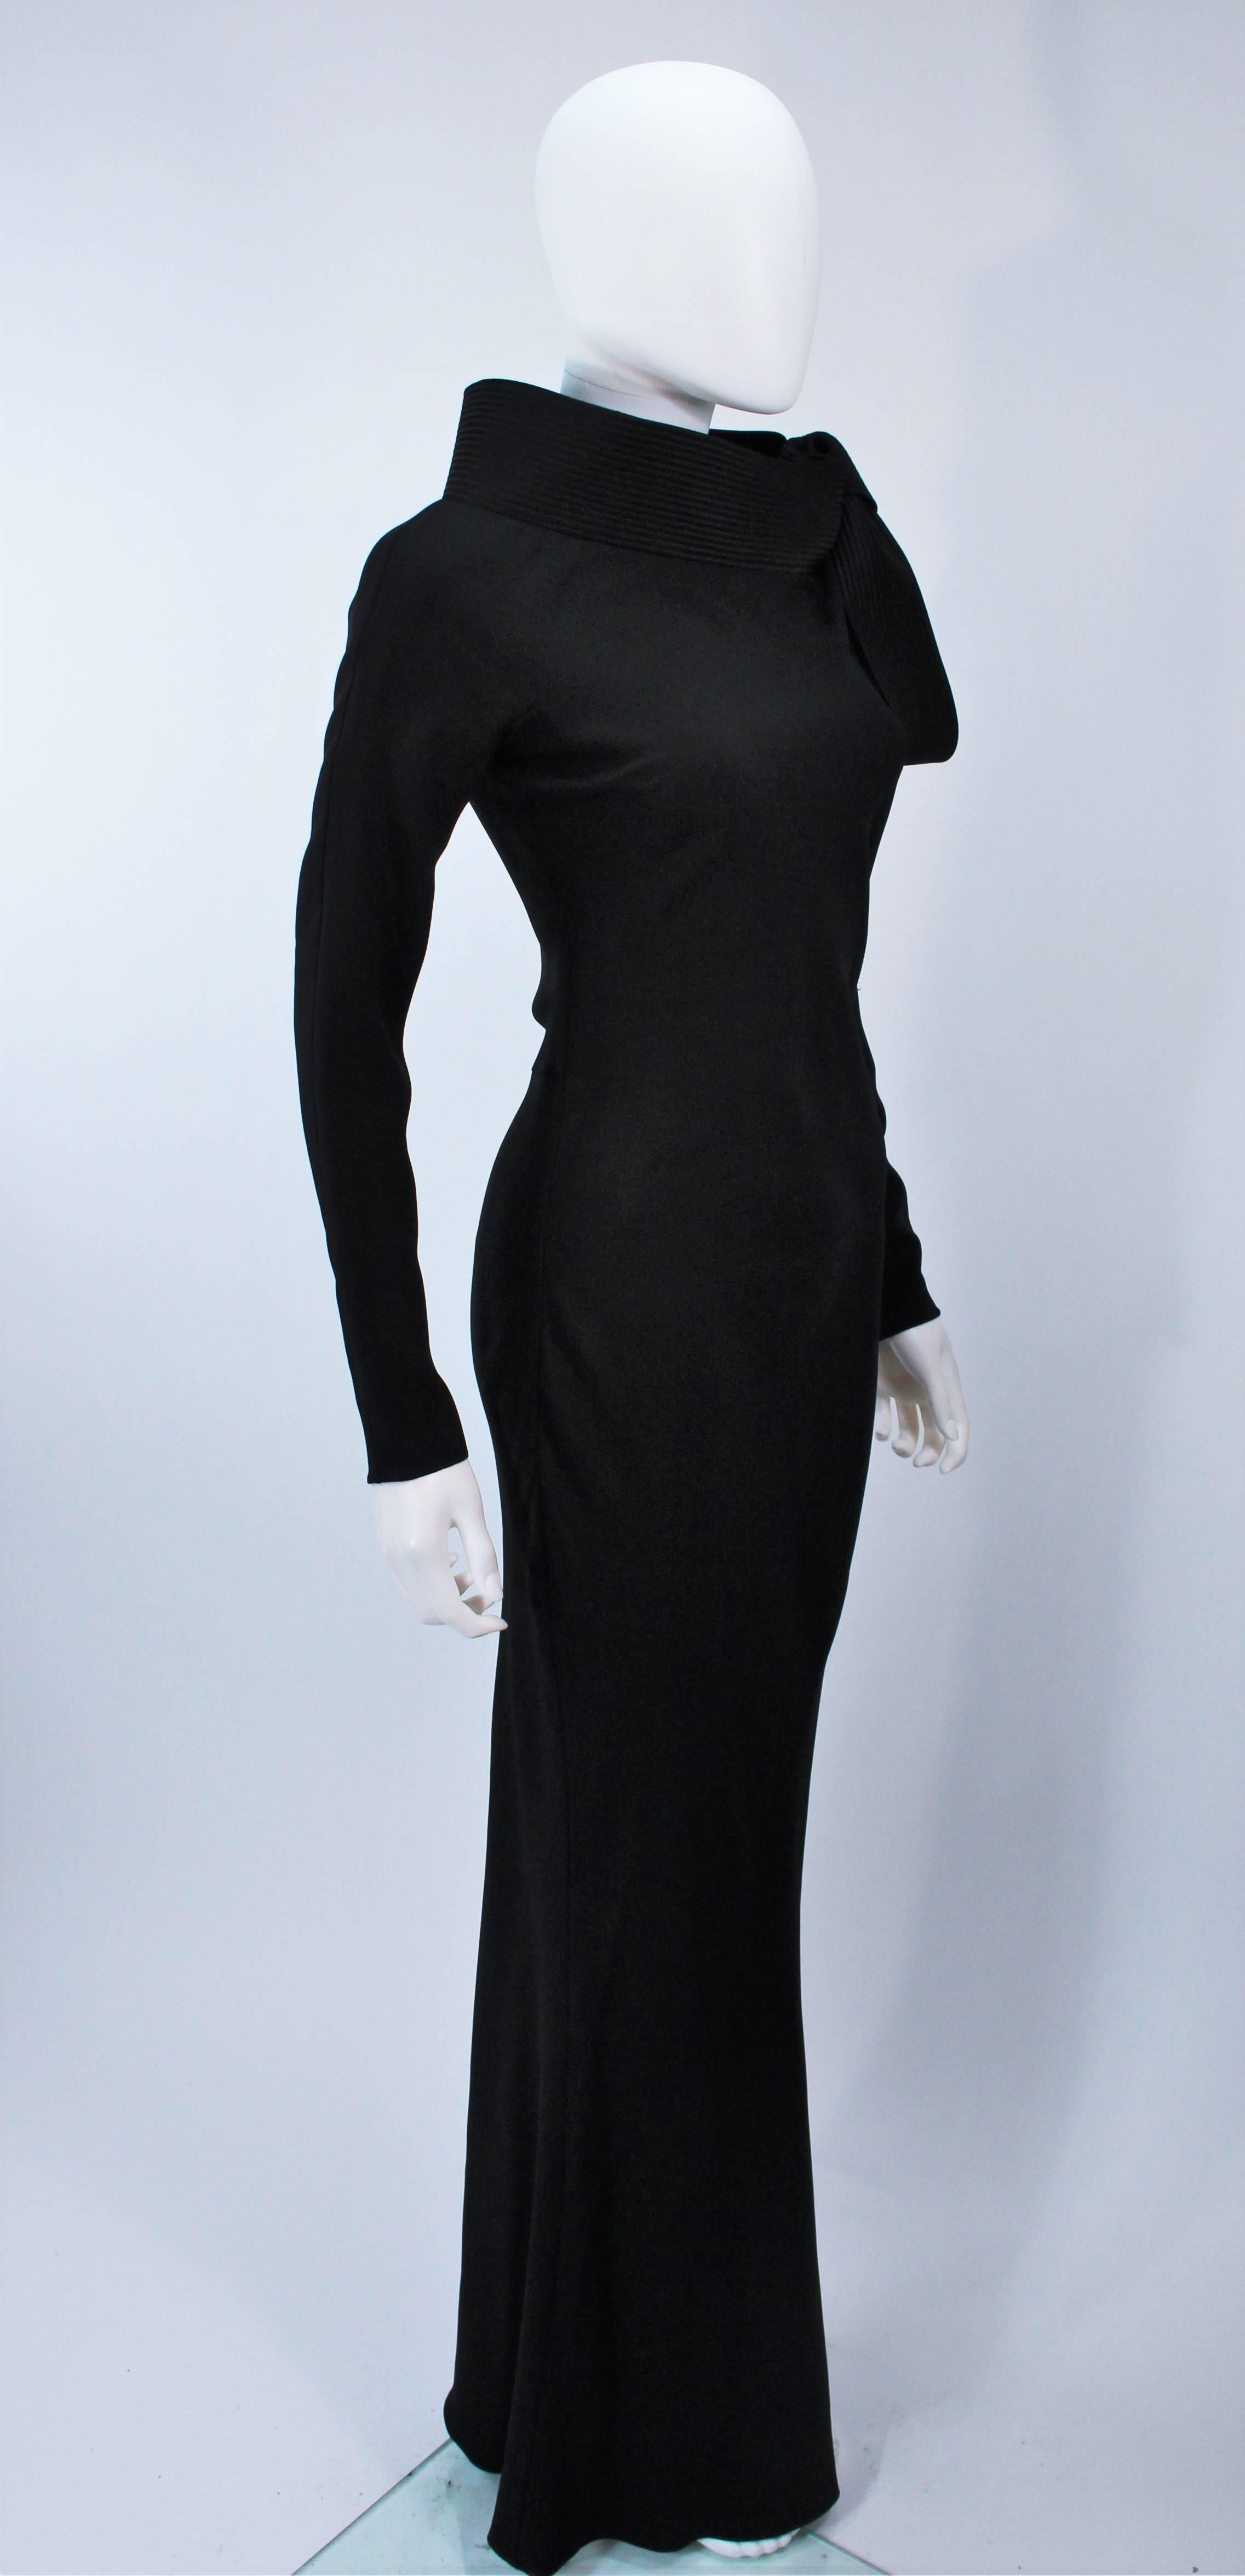 JOHN GALLIANO For CHRISTIAN DIOR Black Gown with Collar Detail Size 38 6 2